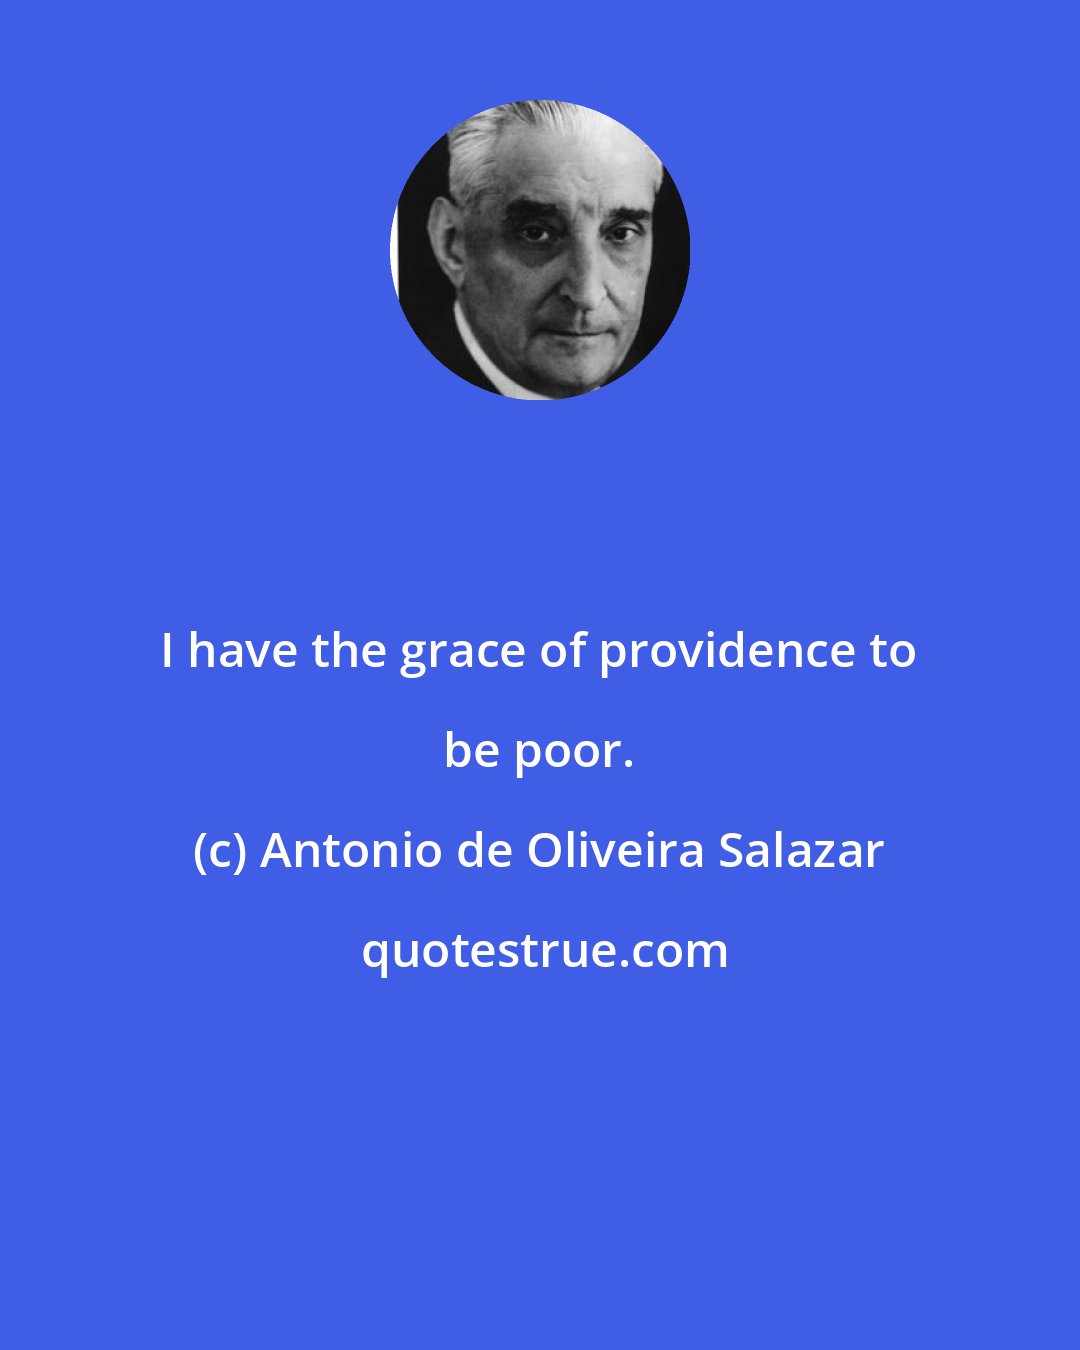 Antonio de Oliveira Salazar: I have the grace of providence to be poor.